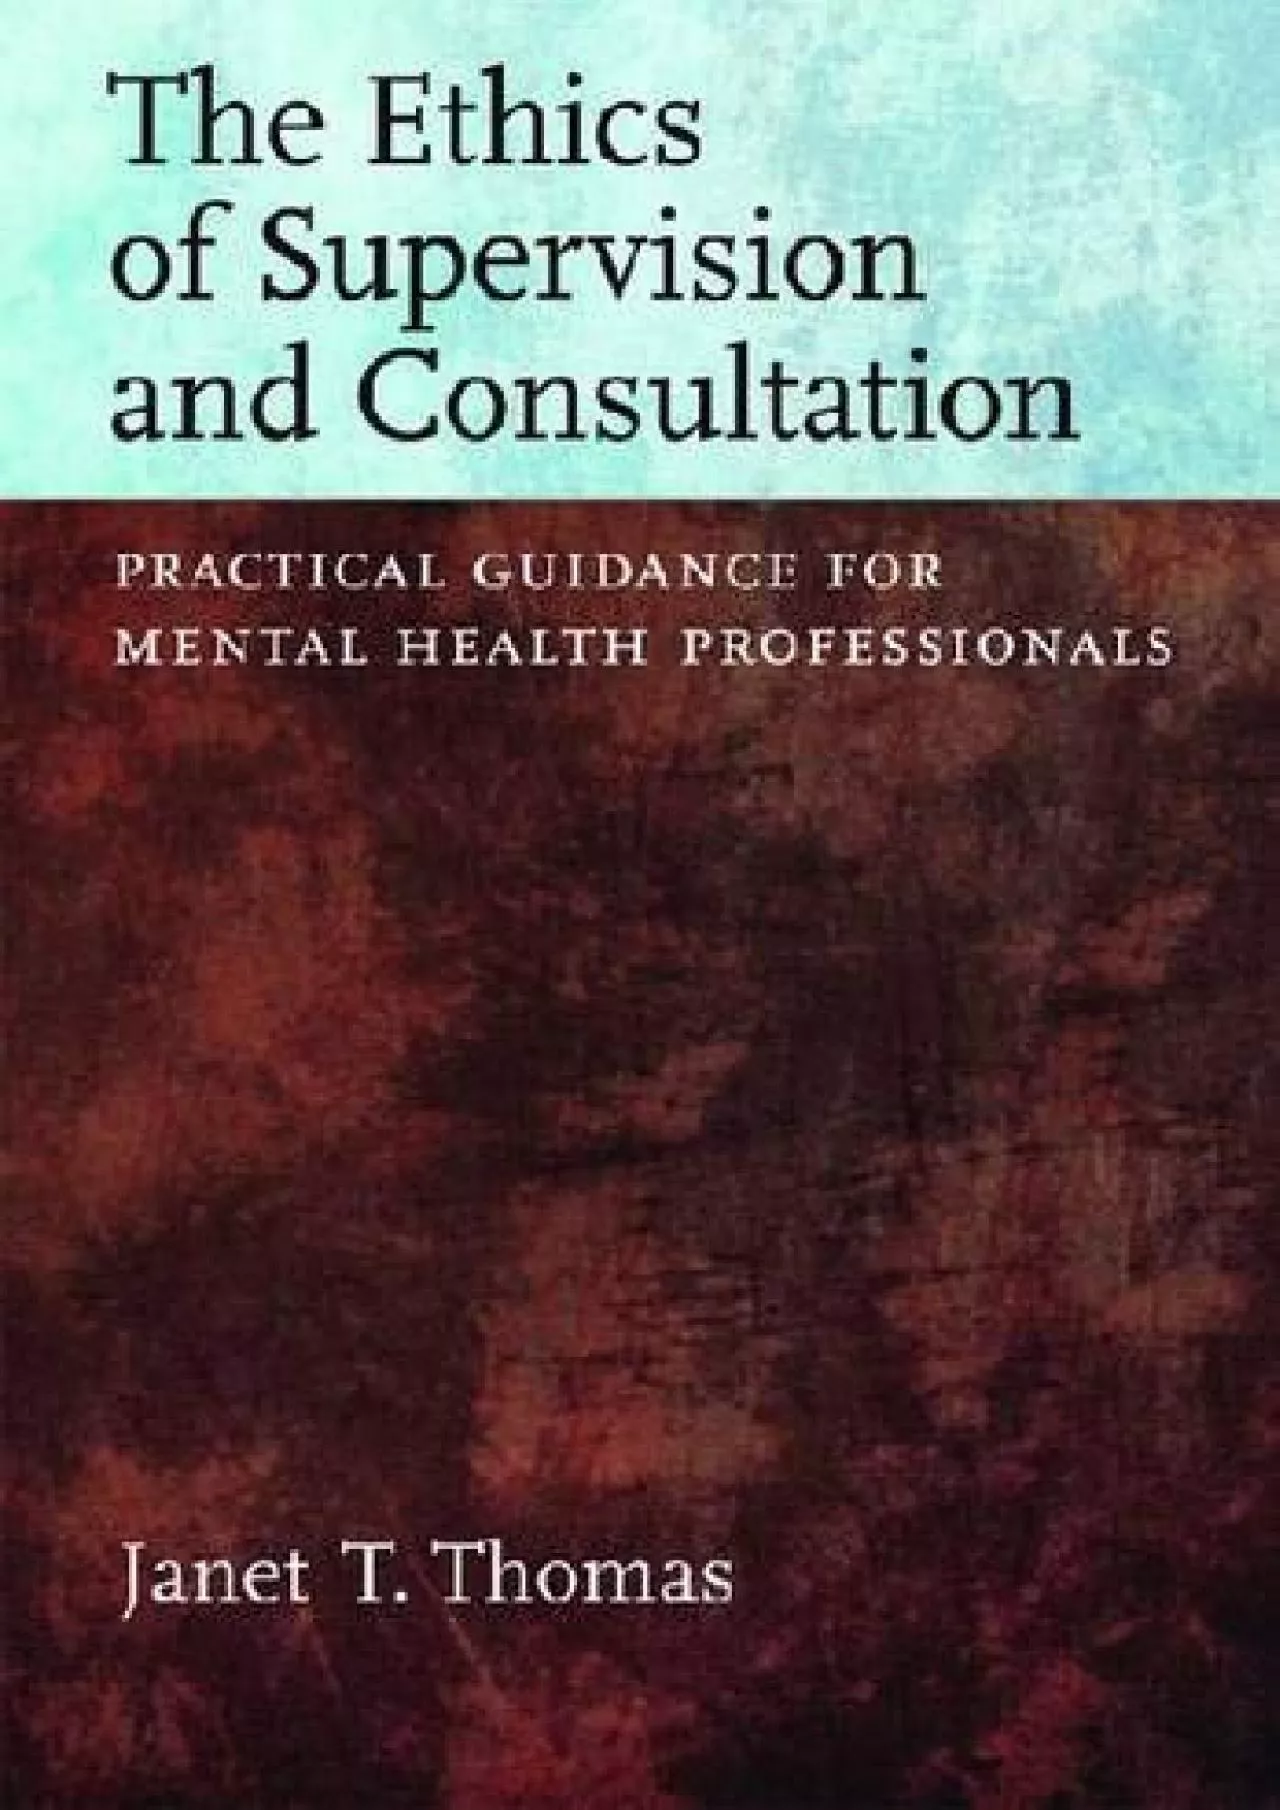 (EBOOK)-The Ethics of Supervision and Consultation: Practical Guidance for Mental Health